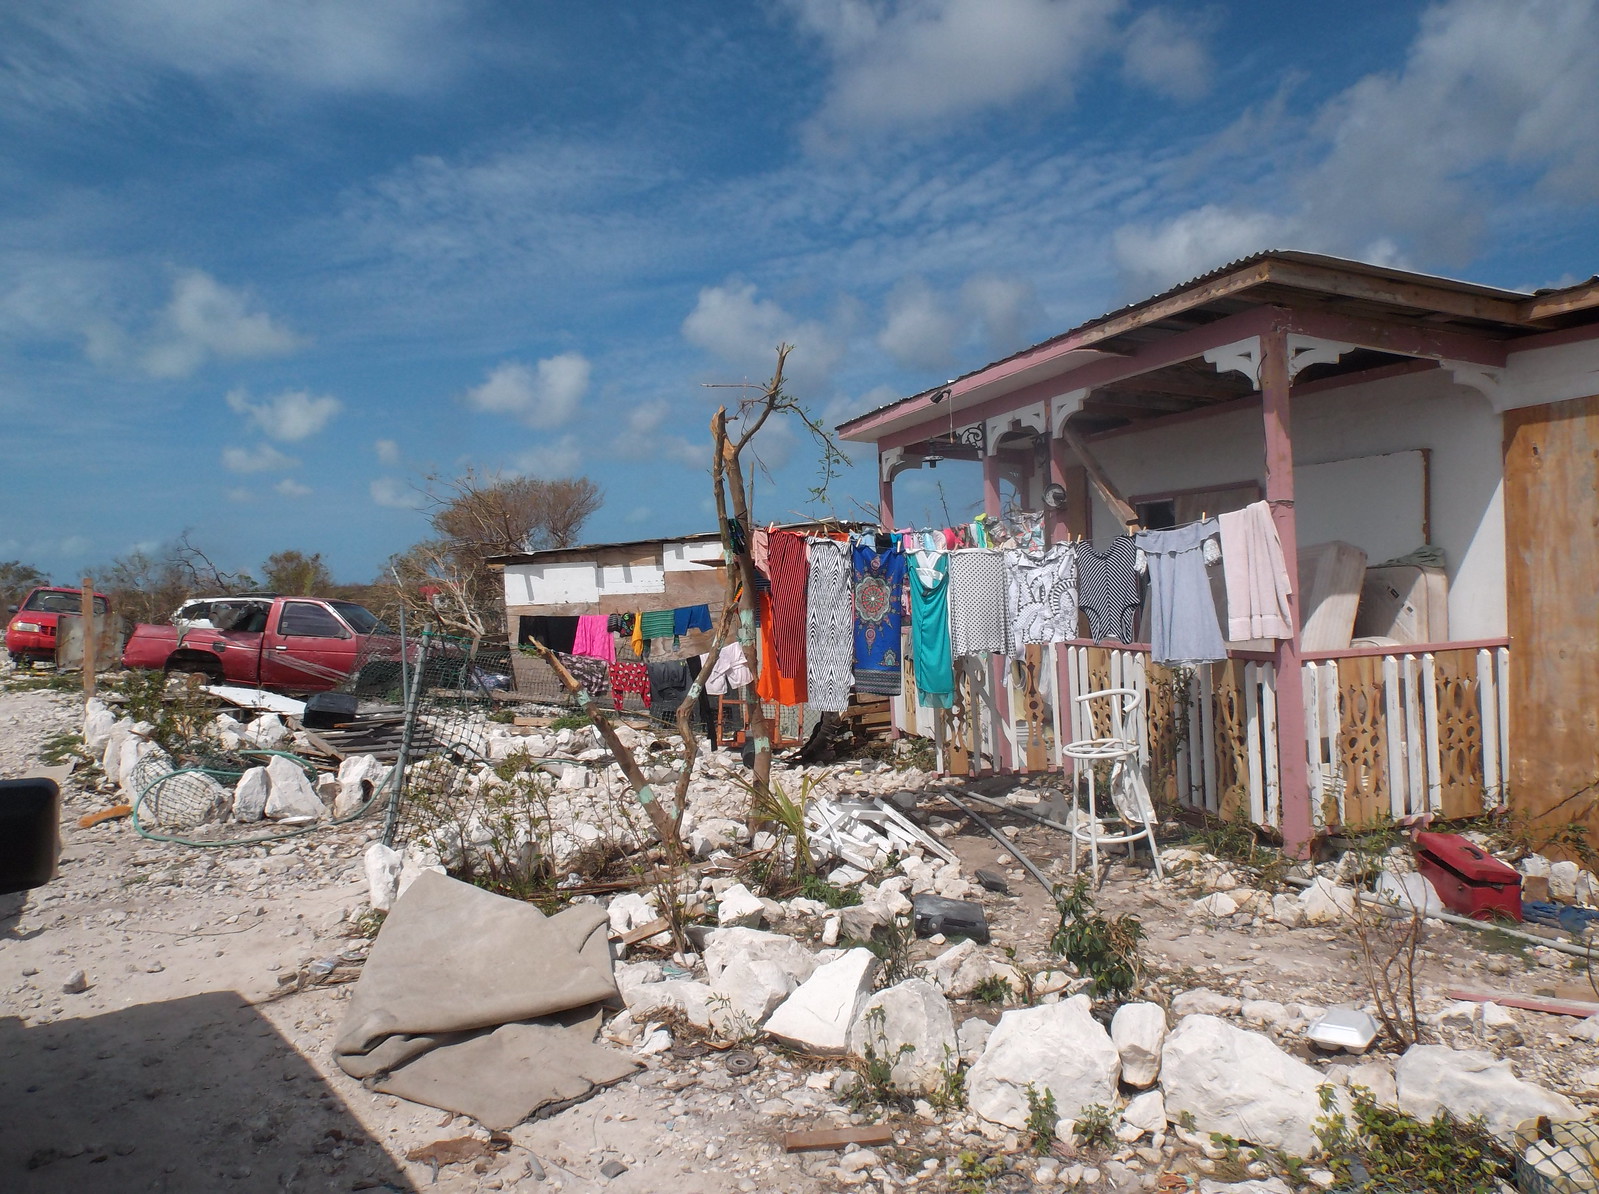 Salvation Army disaster response: Turks and Caicos